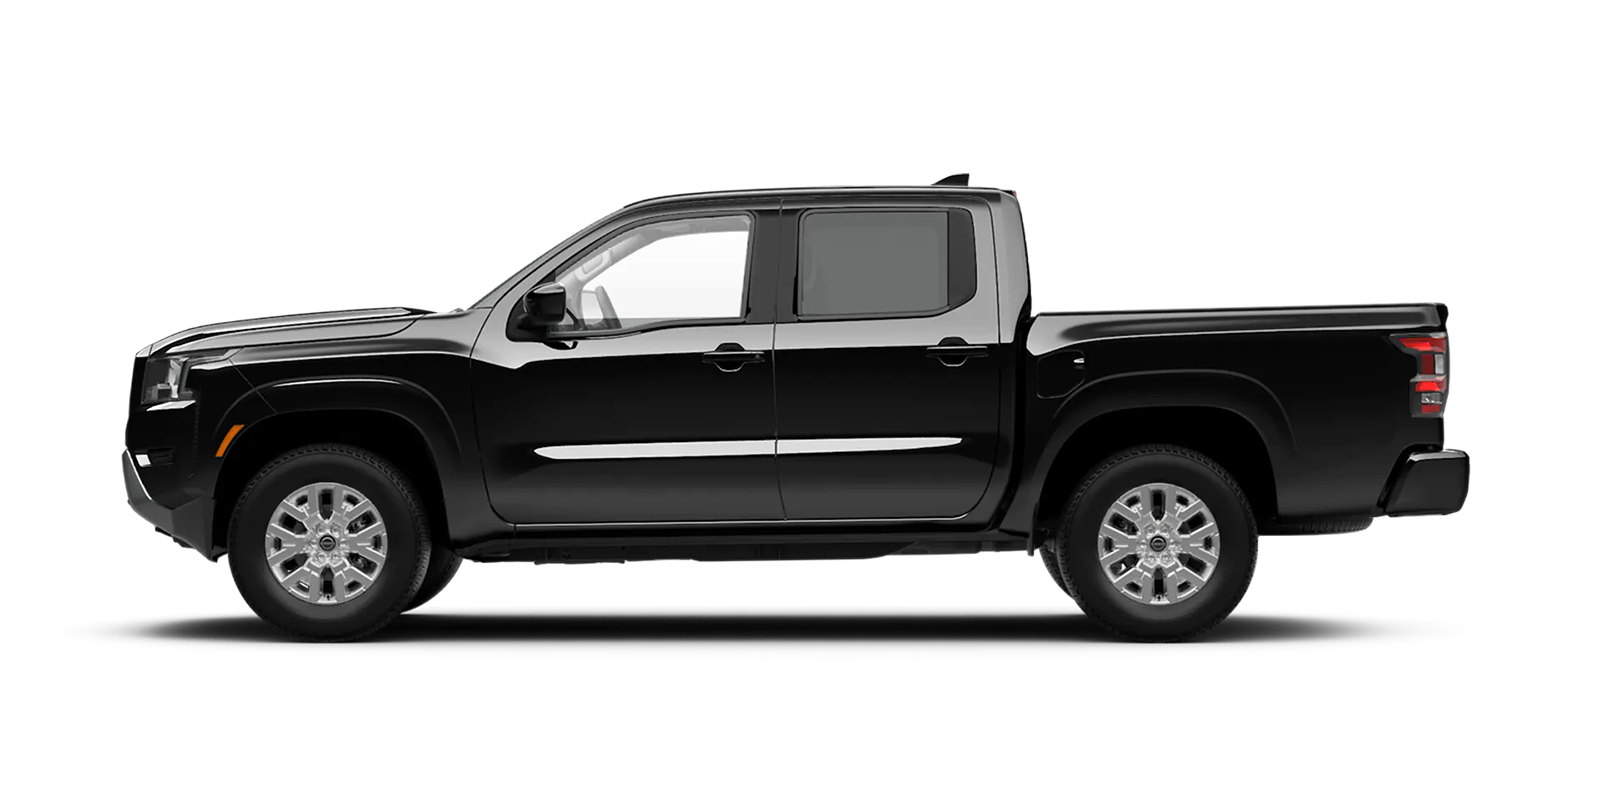 2022 Frontier Crew Cab SV 4x4 in Super Black | Nissan of Pittsfield in Pittsfield MA